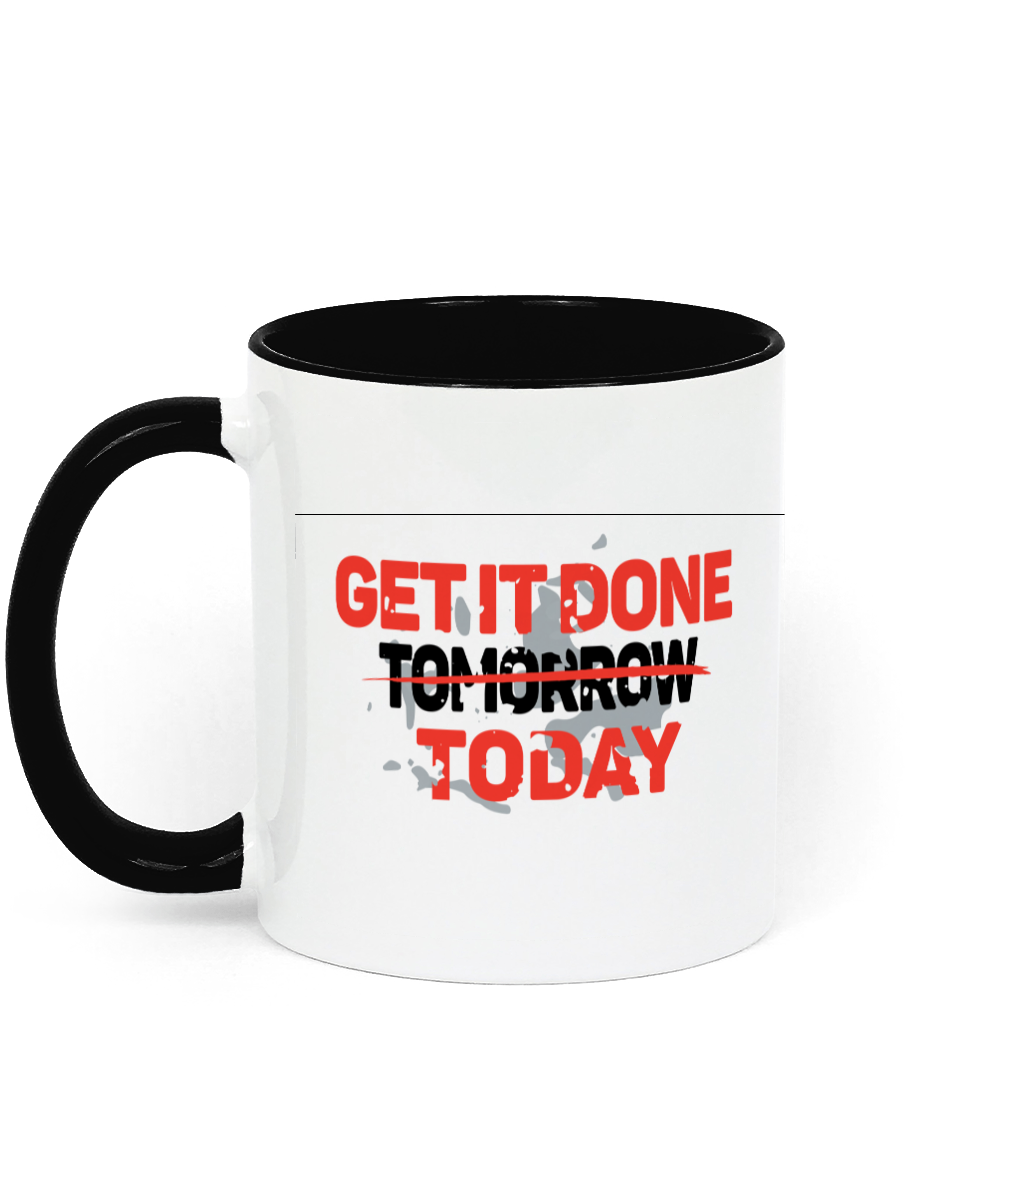 Get it done today 11 oz mug. Daily Affirmations, Motivation, Inspiration, Productivity, Achieving Goals. Perfect Gift. Two-toned.  Black.